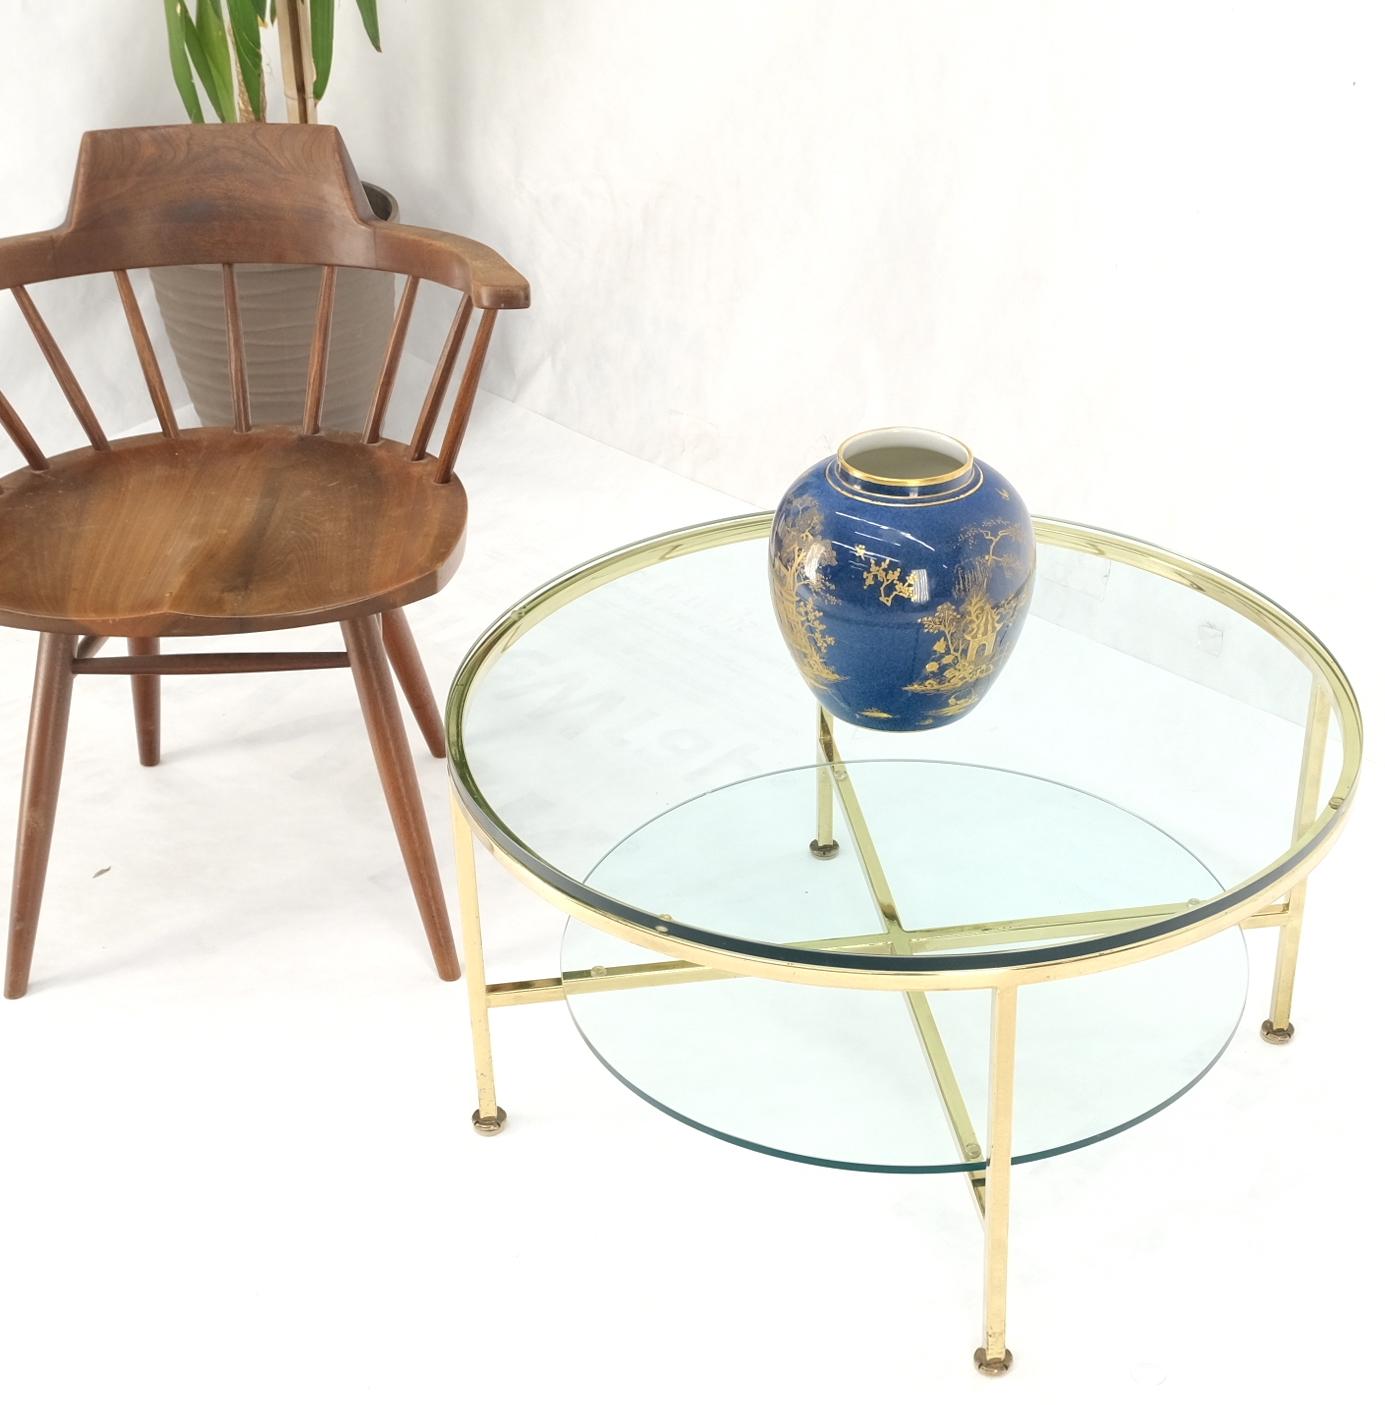 Two tier cross shape brass base round occasional coffee side end table stand.
Paul McCobb style - attributed.